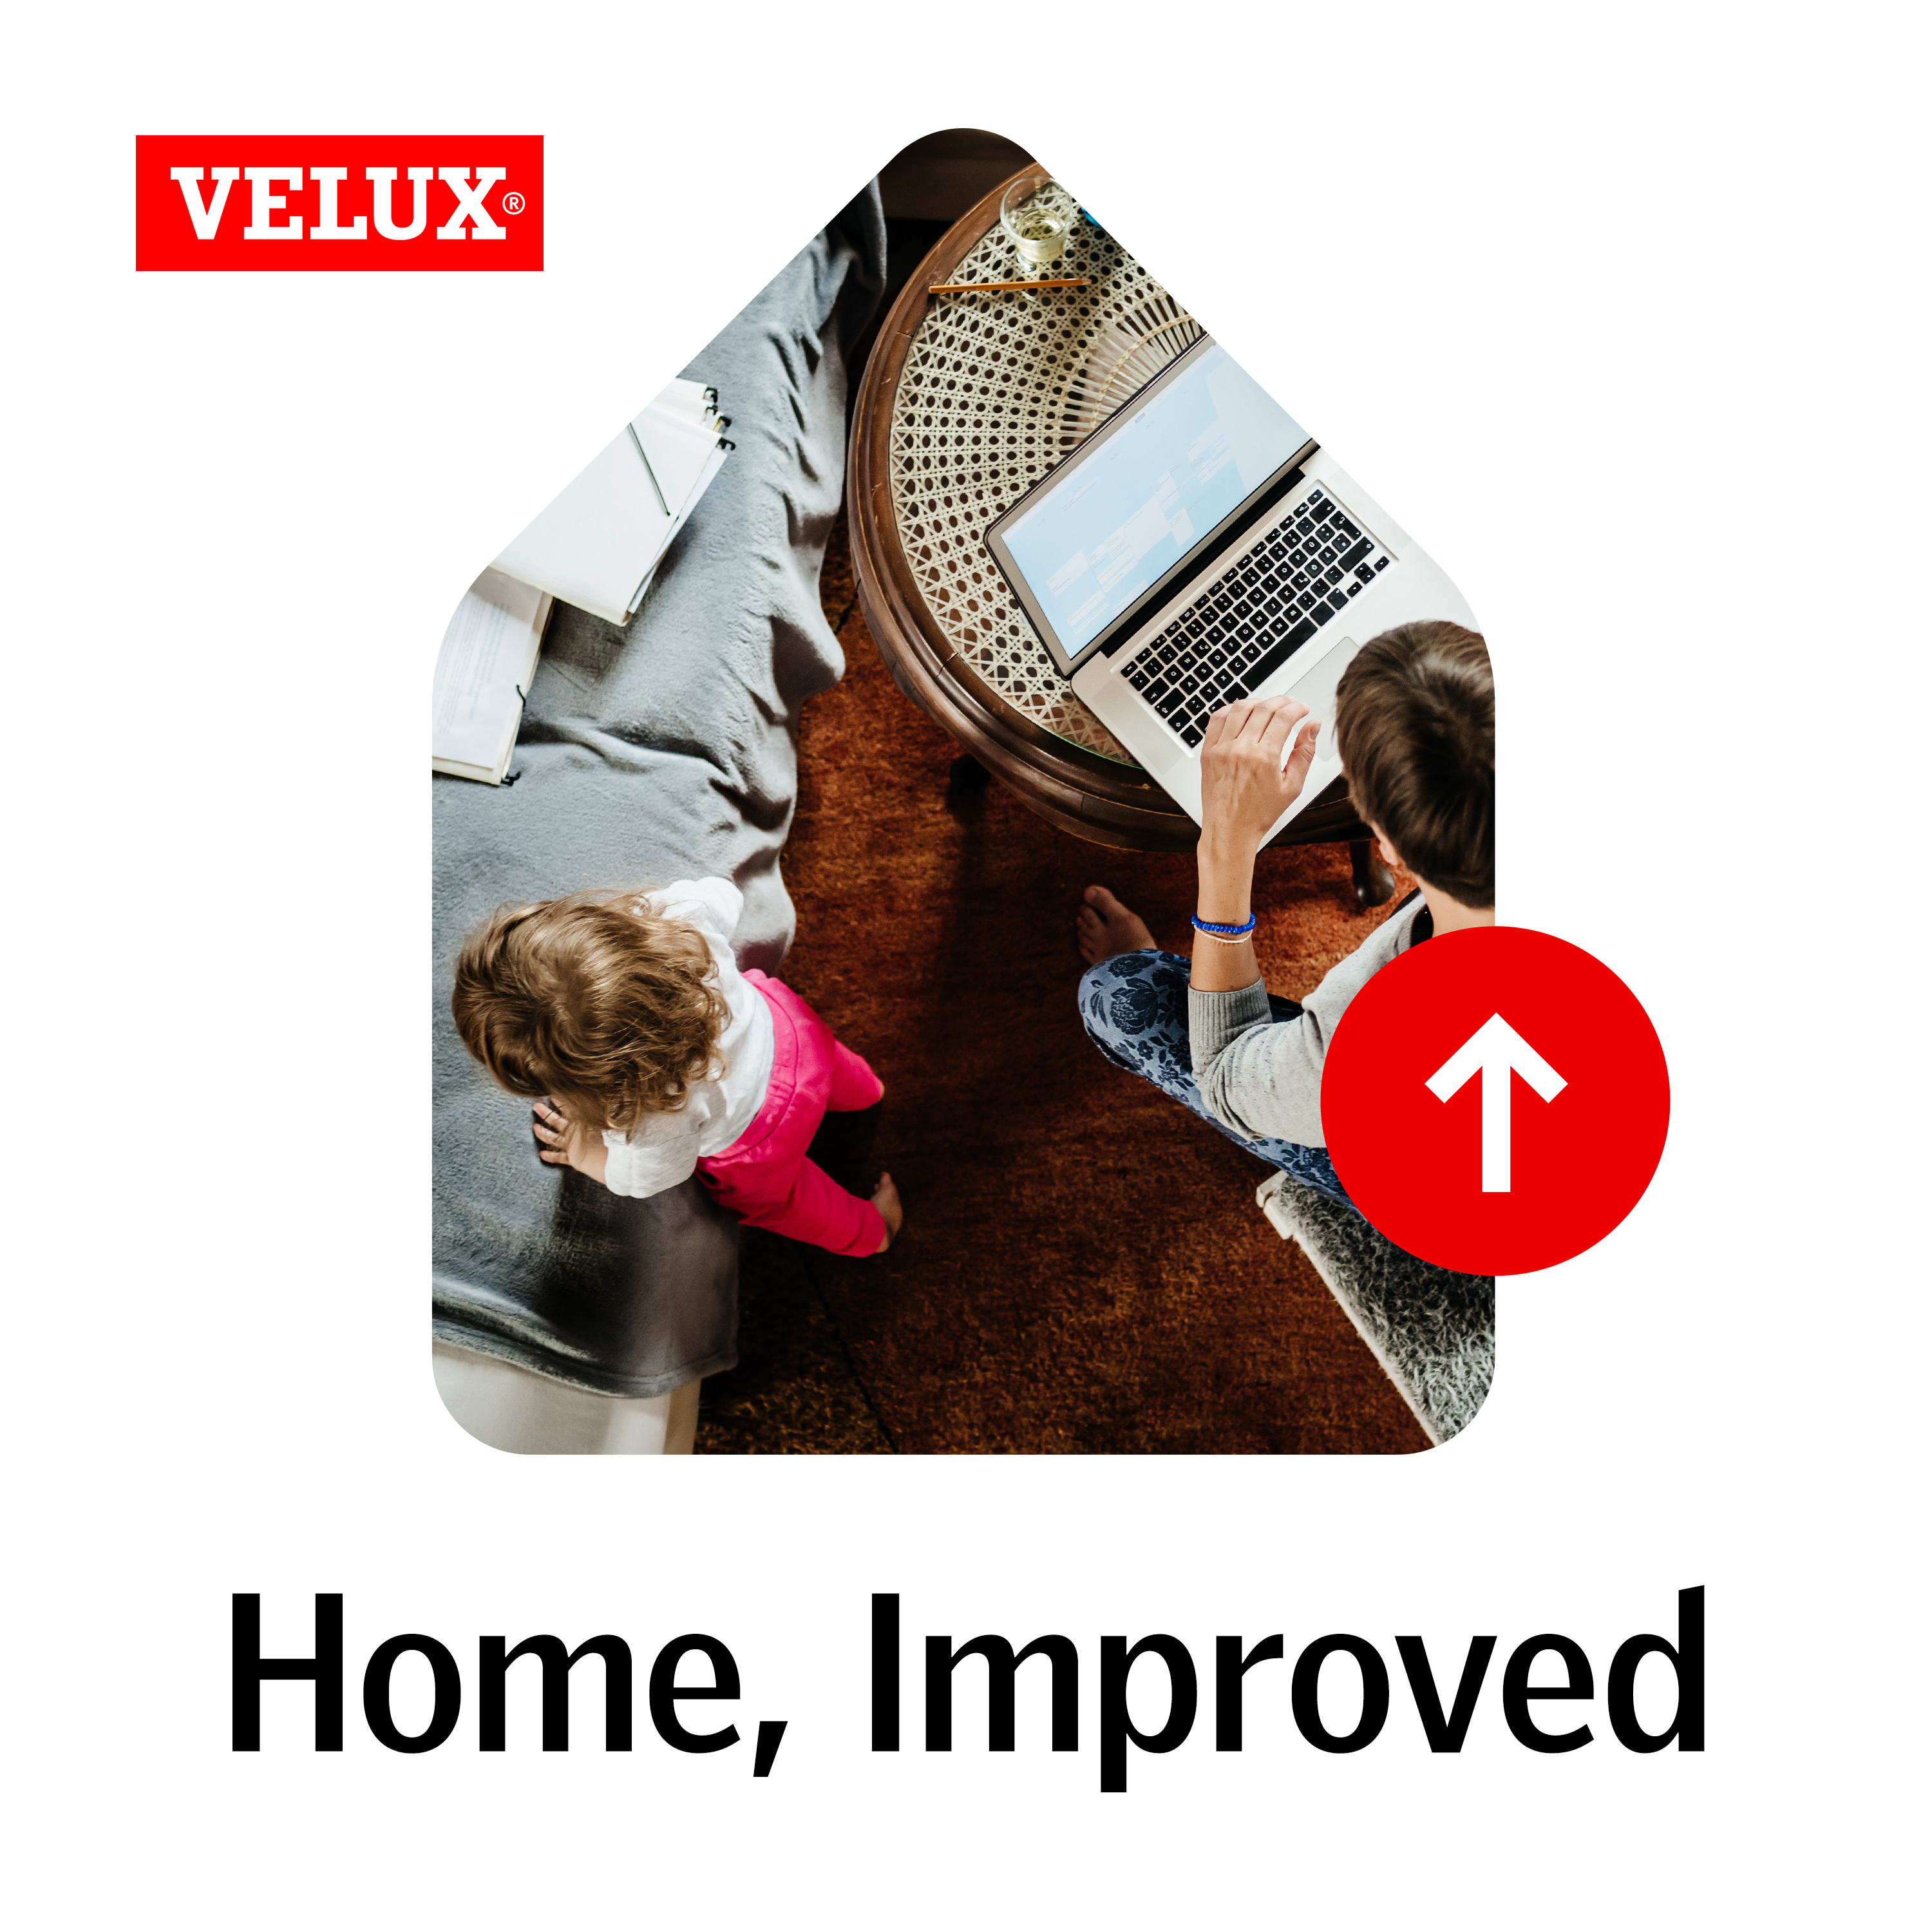 Creating an international podcast, with Velux